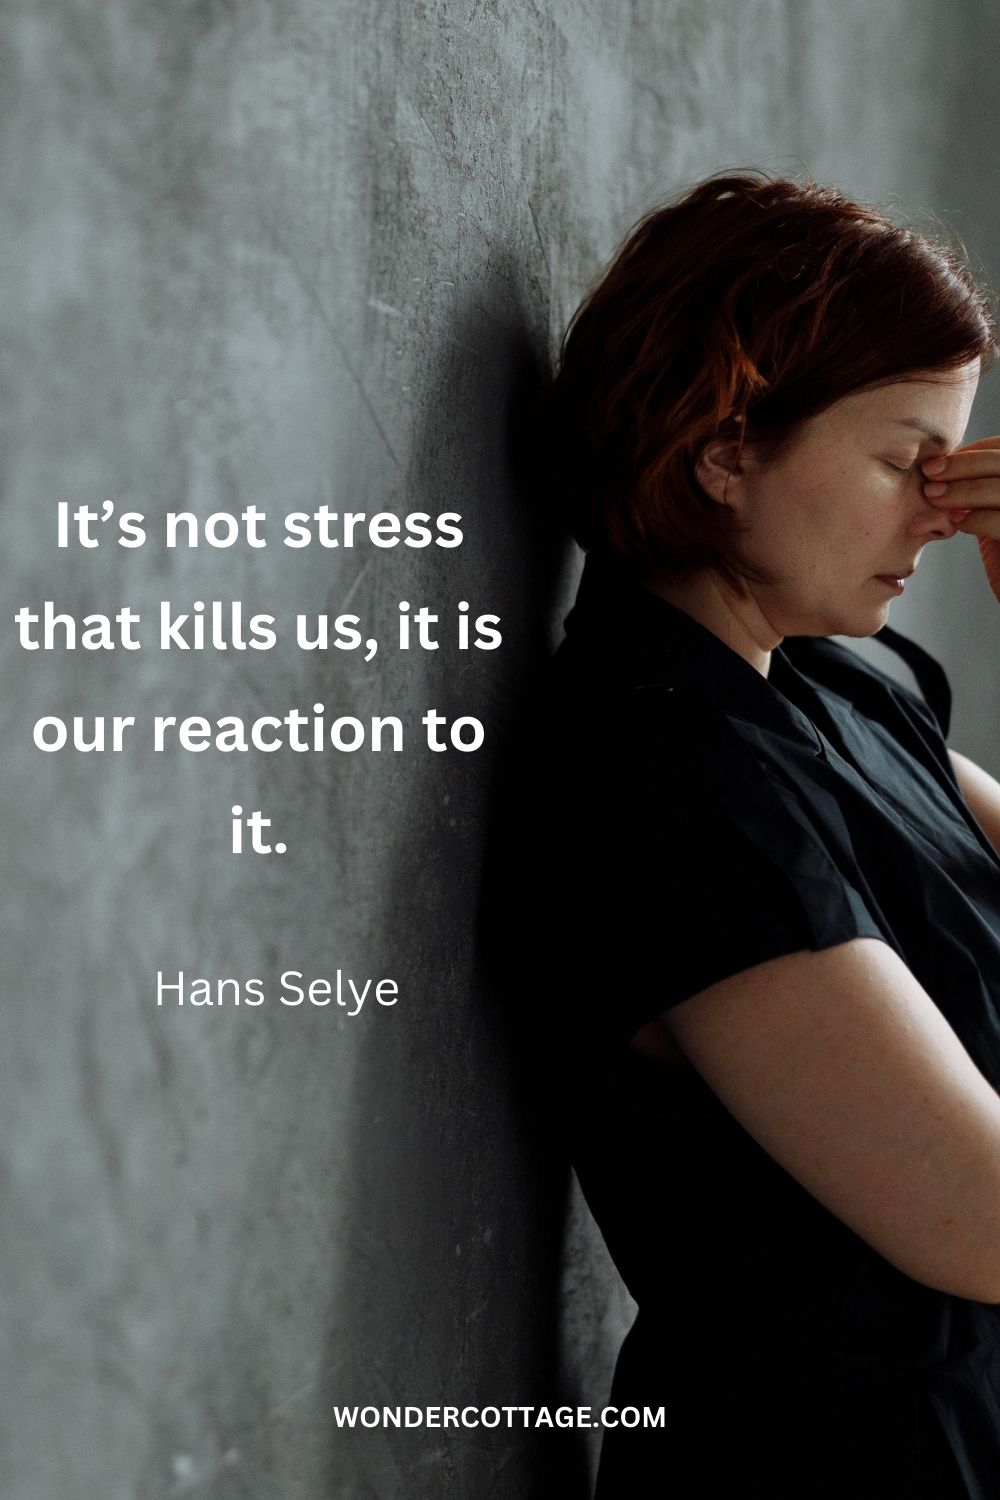 It’s not stress that kills us, it is our reaction to it. Hans Selye